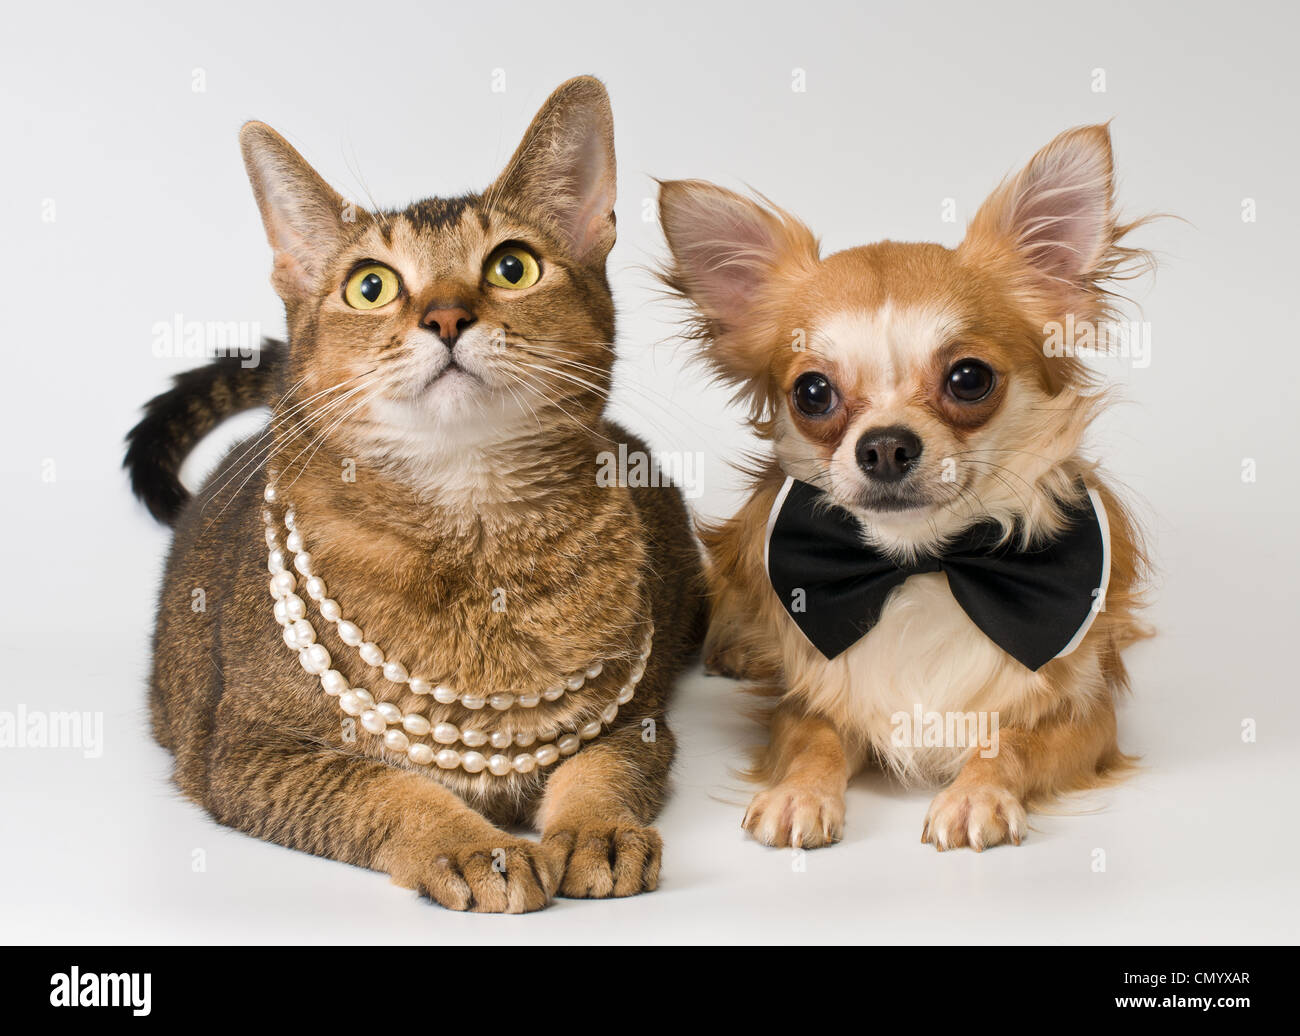 Cat and chihuahua in studio on a neutral background Stock Photo